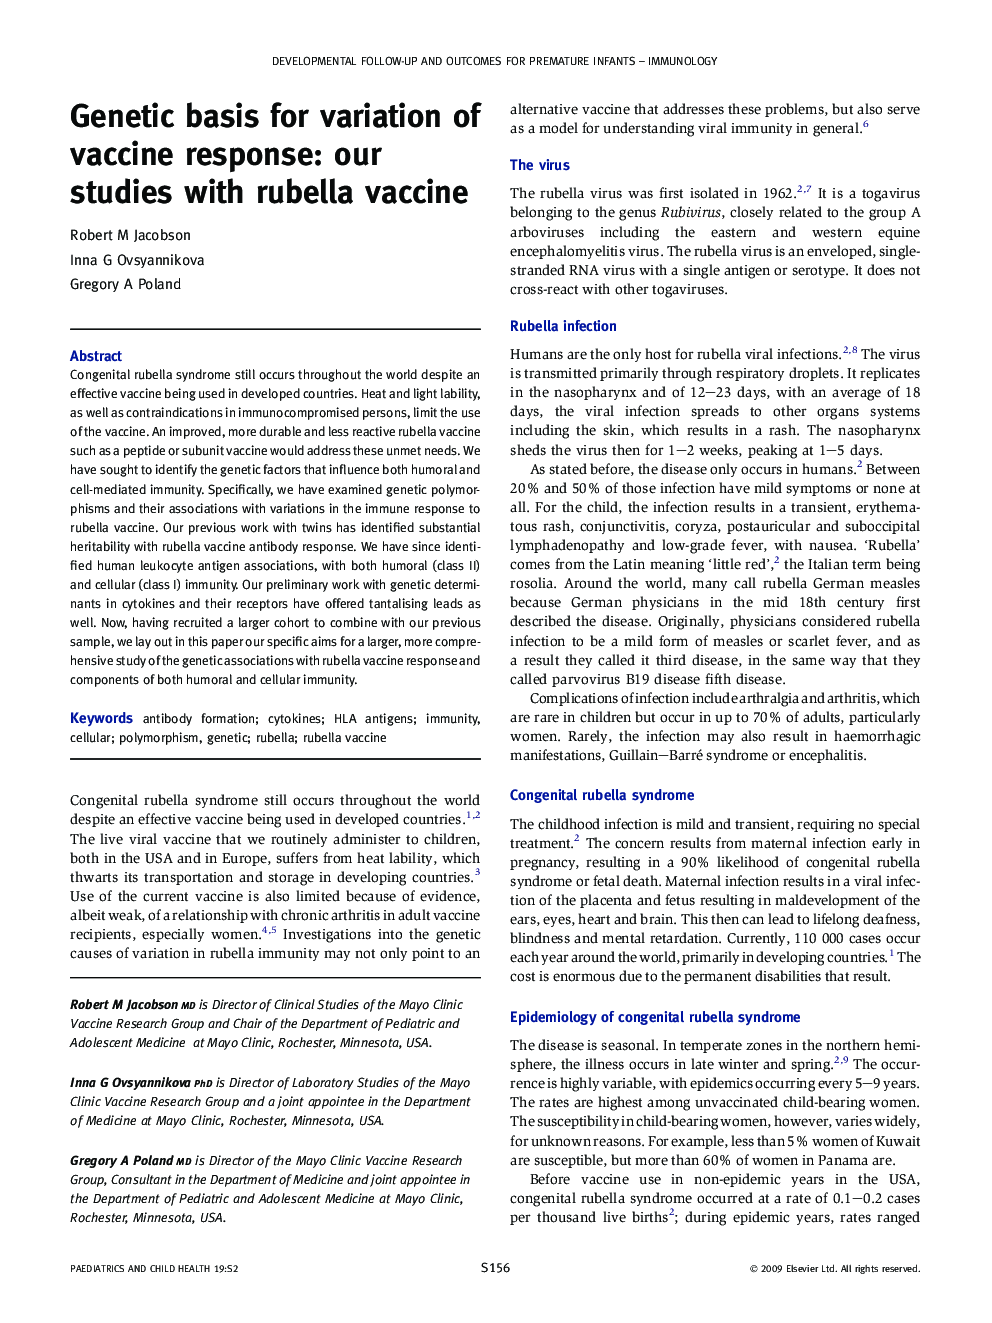 Genetic basis for variation of vaccine response: our studies with rubella vaccine